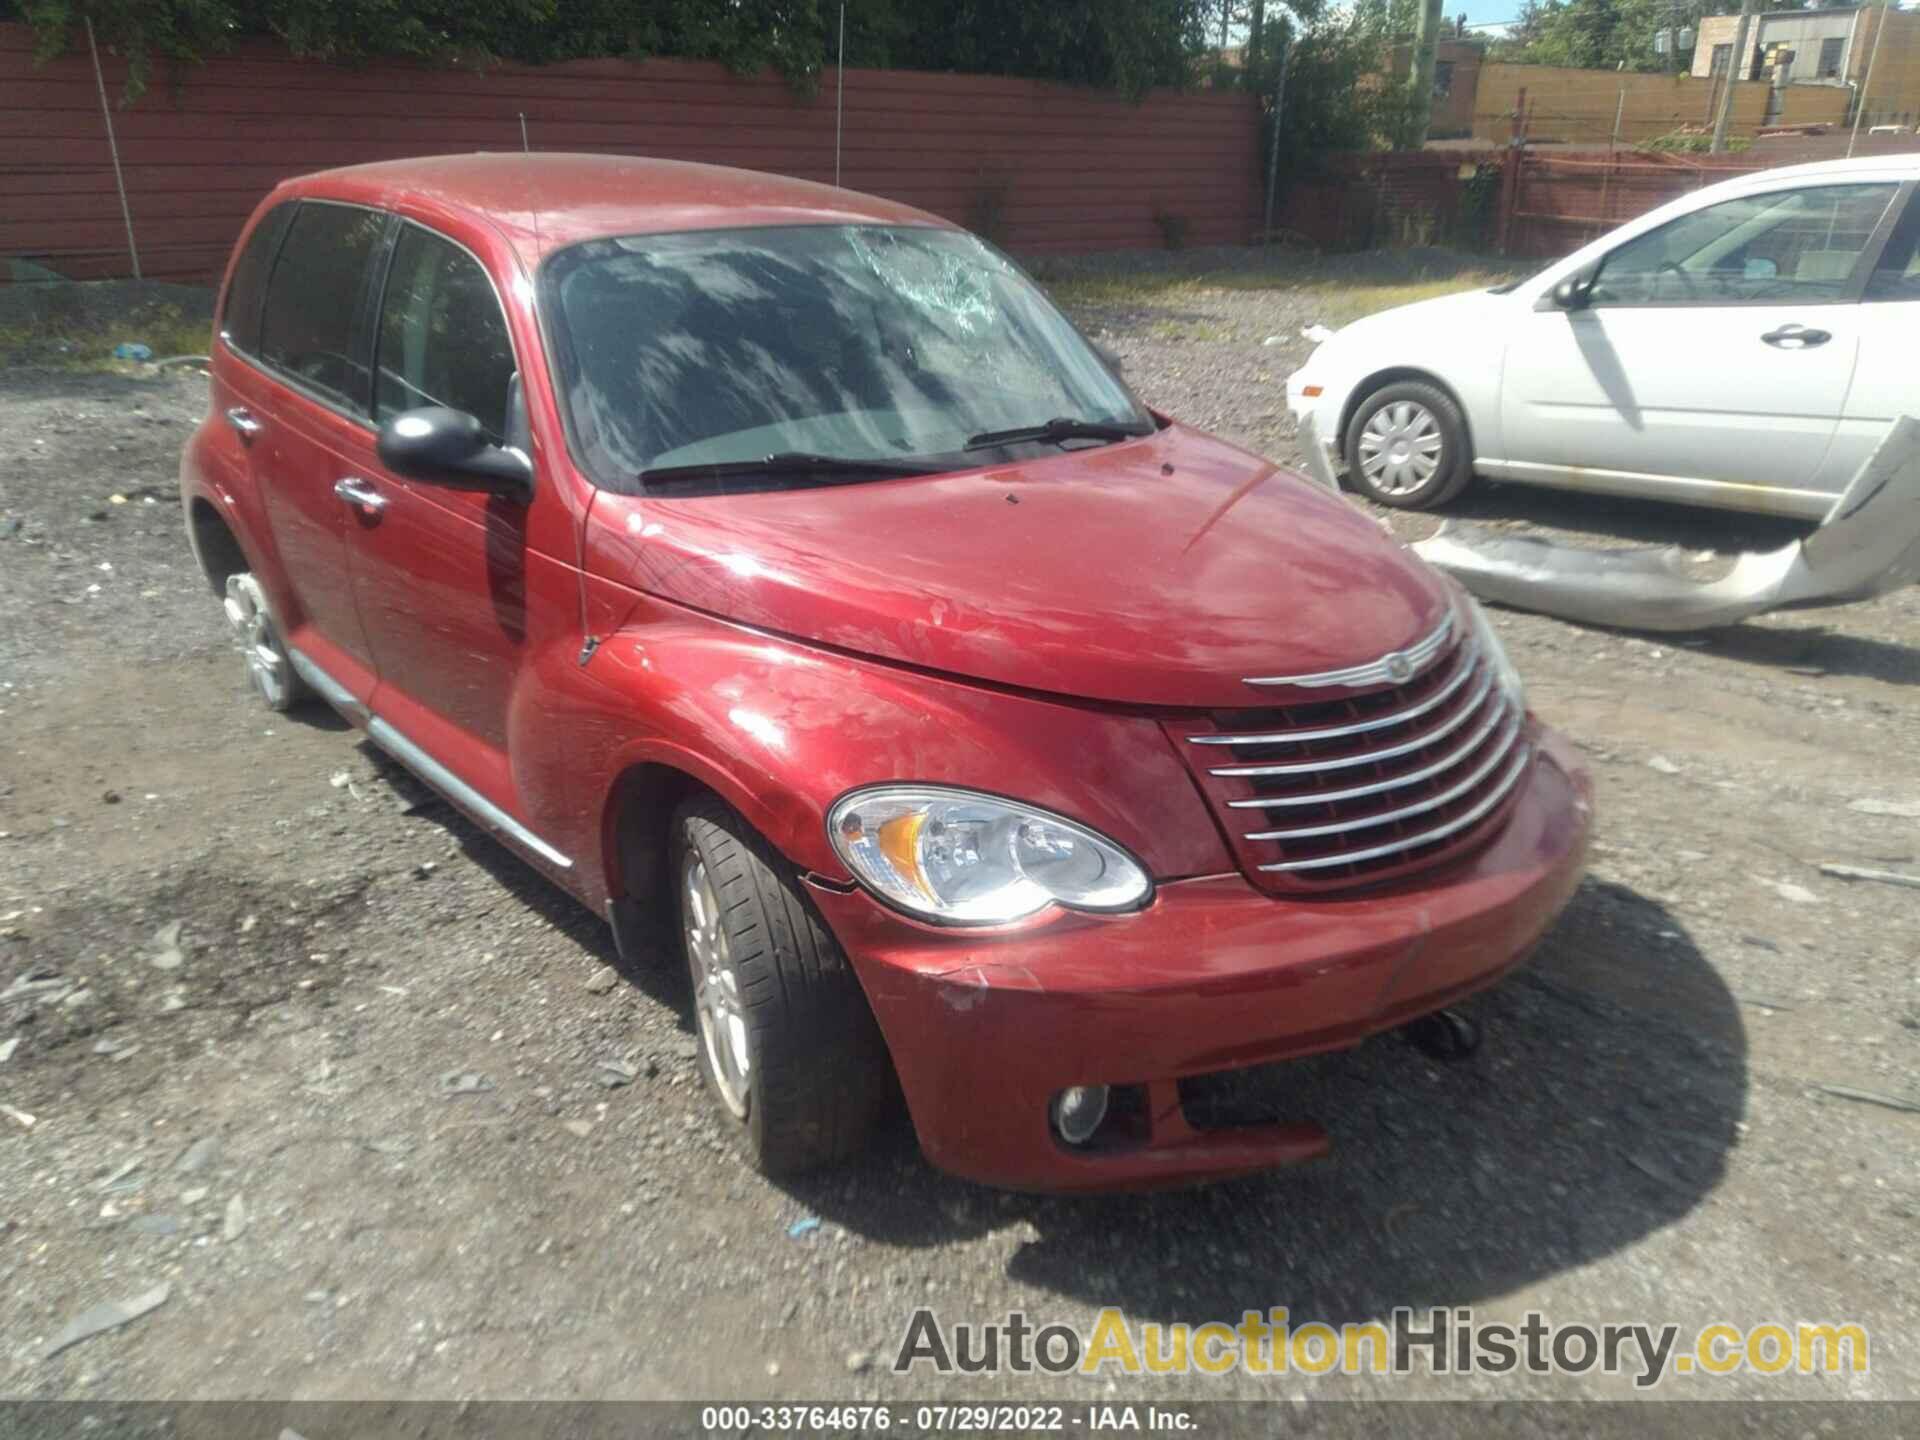 CHRYSLER PT CRUISER CLASSIC, 3A4GY5F93AT174122